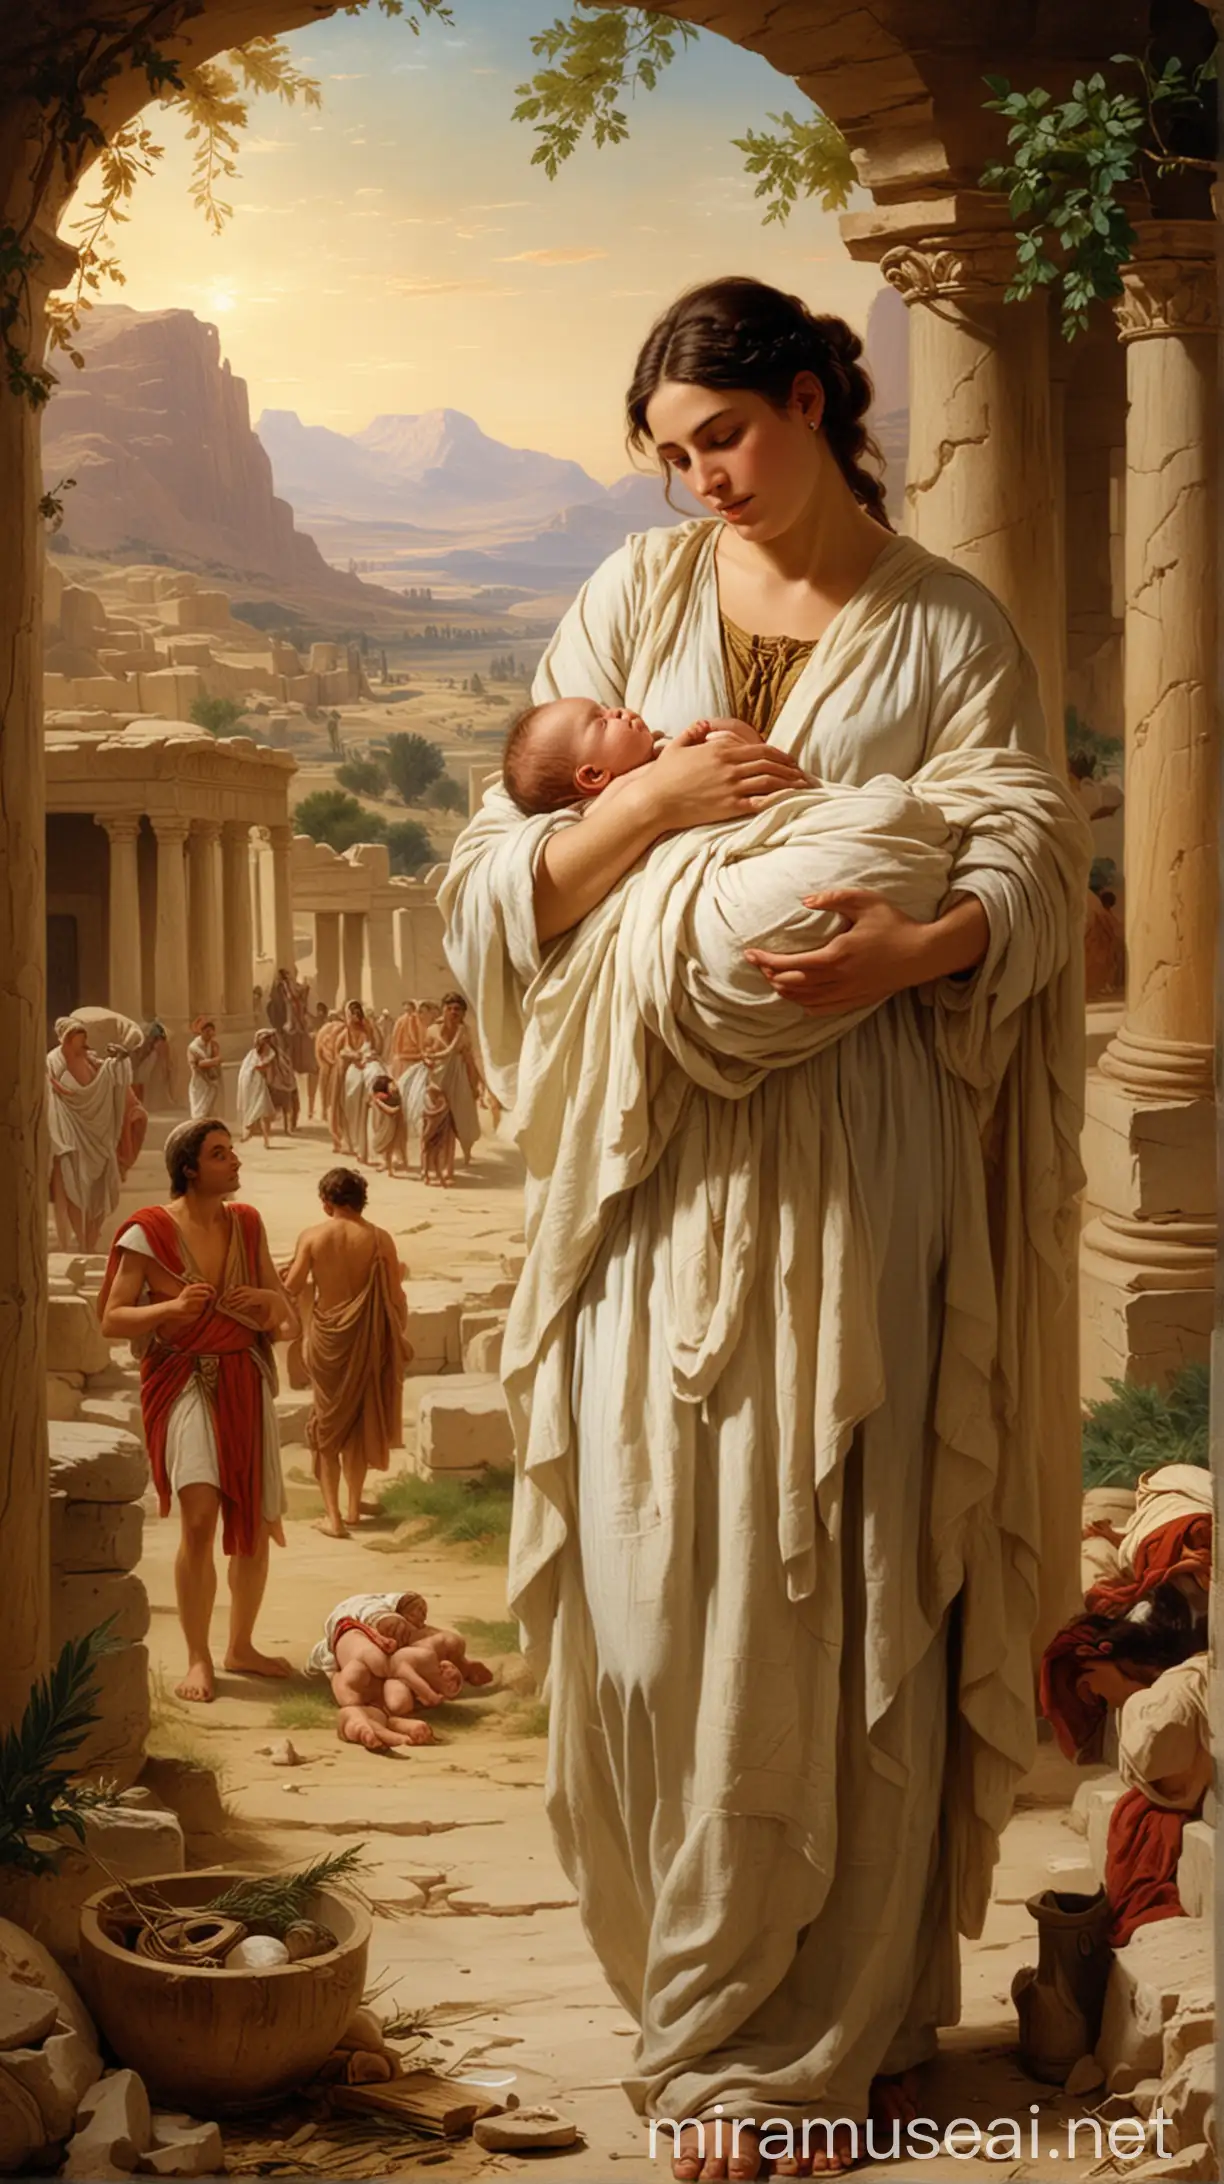 Prompt: "Depict a scene from ancient times around the 19th century BC showing a newborn child named Ammon with his mother and Lot. The setting should be modest and reflective of early biblical times."In ancient world 